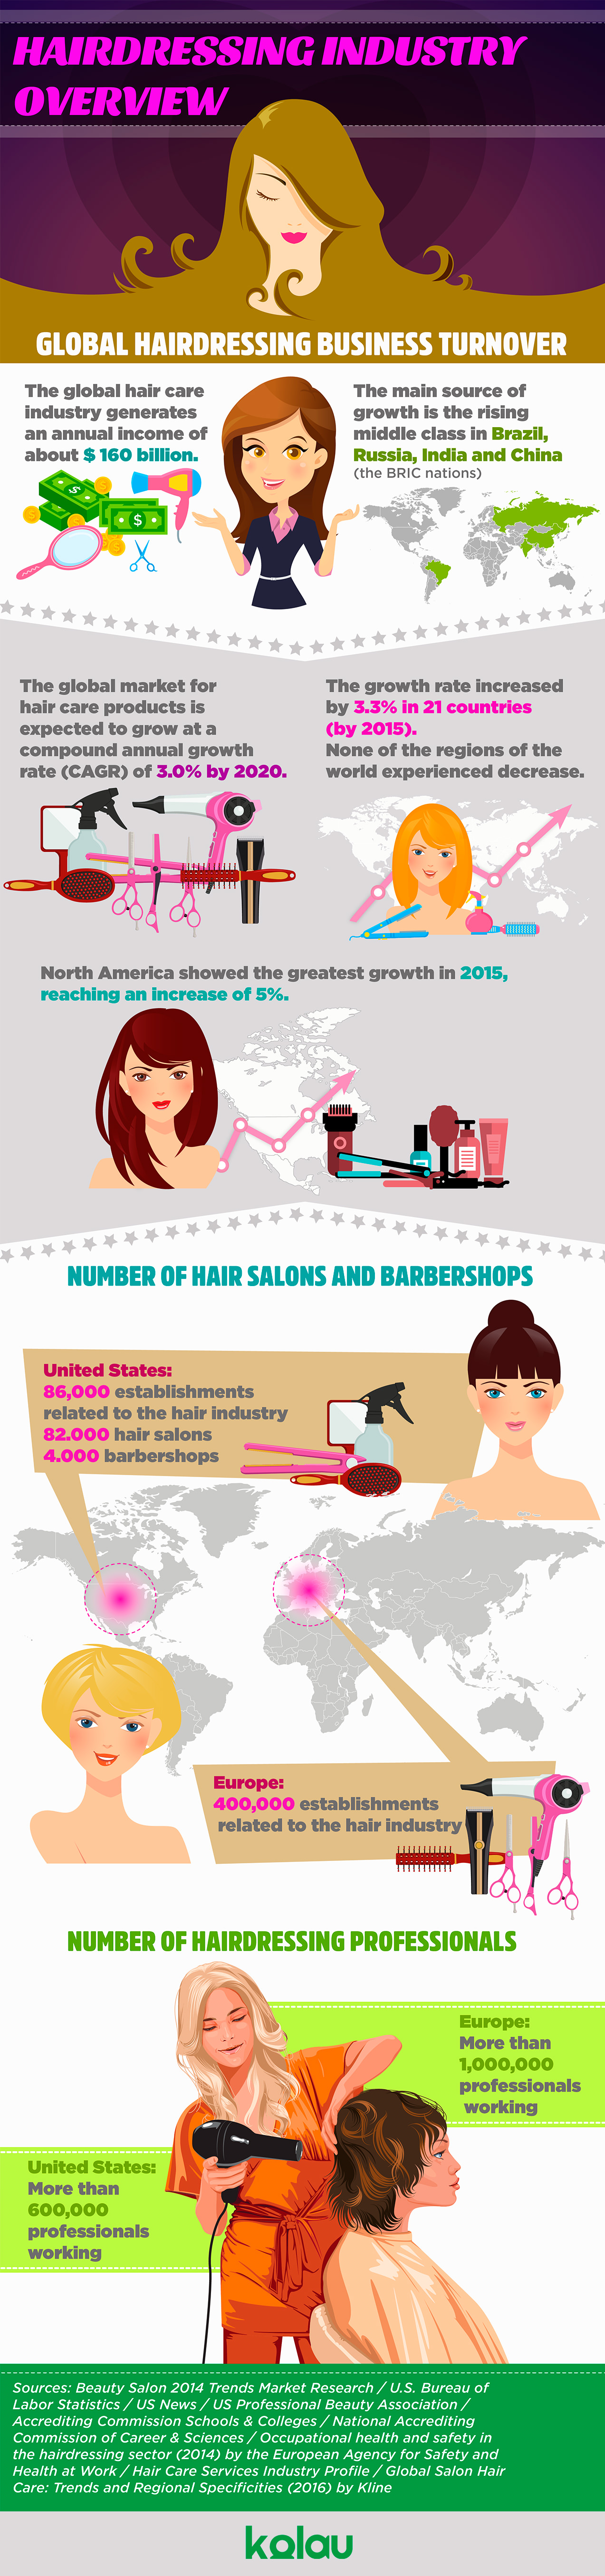 Marketing ideas for hair salons. Hairdressing industry infographic.